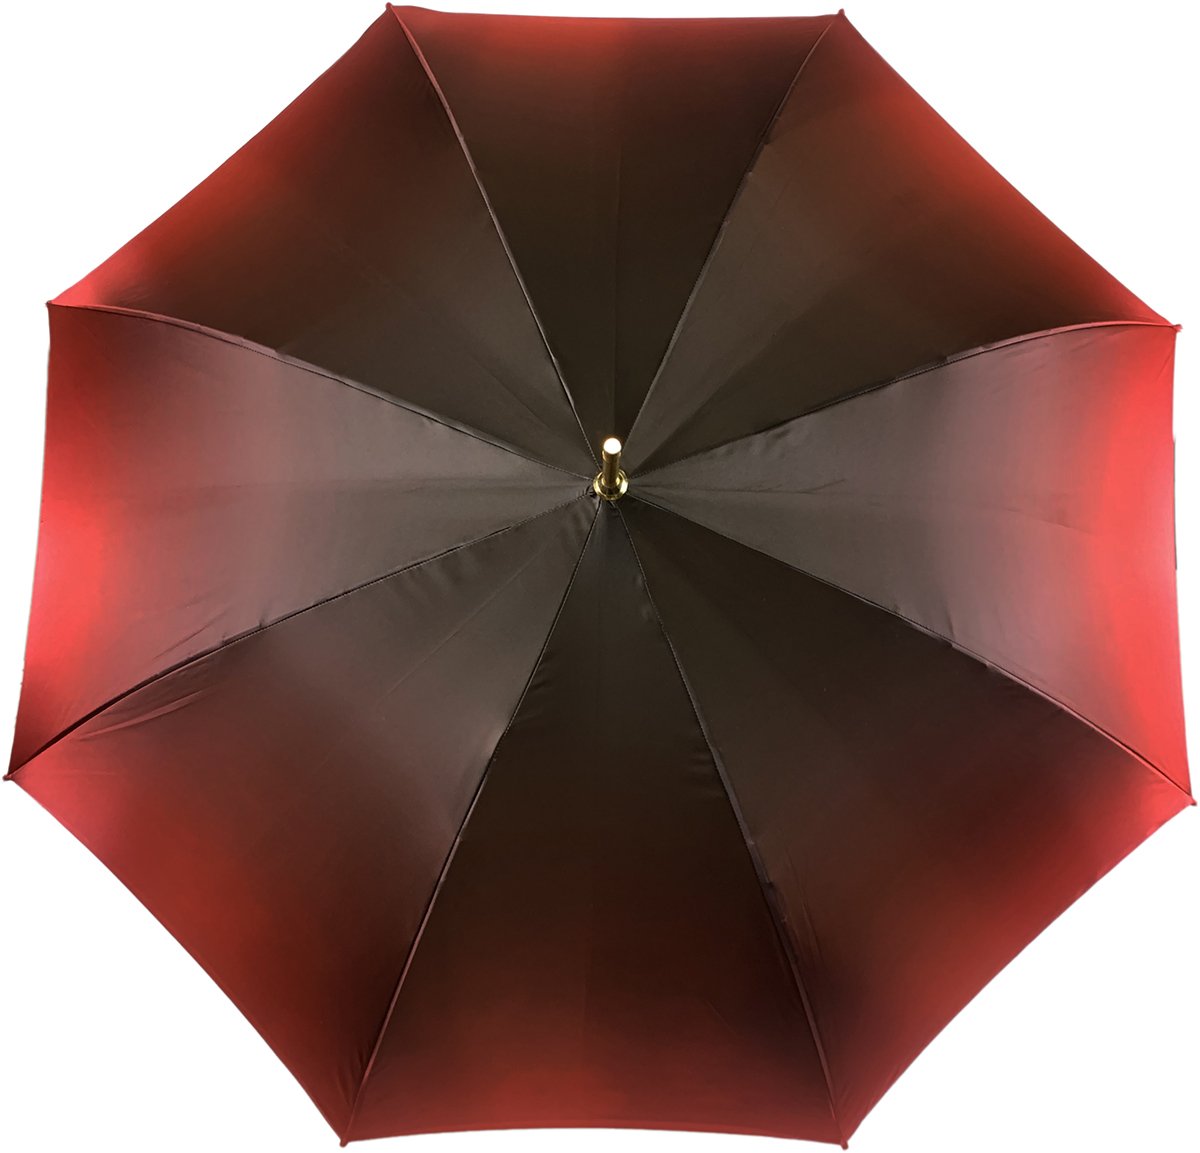 Nice And Elegant Flowered Umbrella - IL MARCHESATO LUXURY UMBRELLAS, CANES AND SHOEHORNS